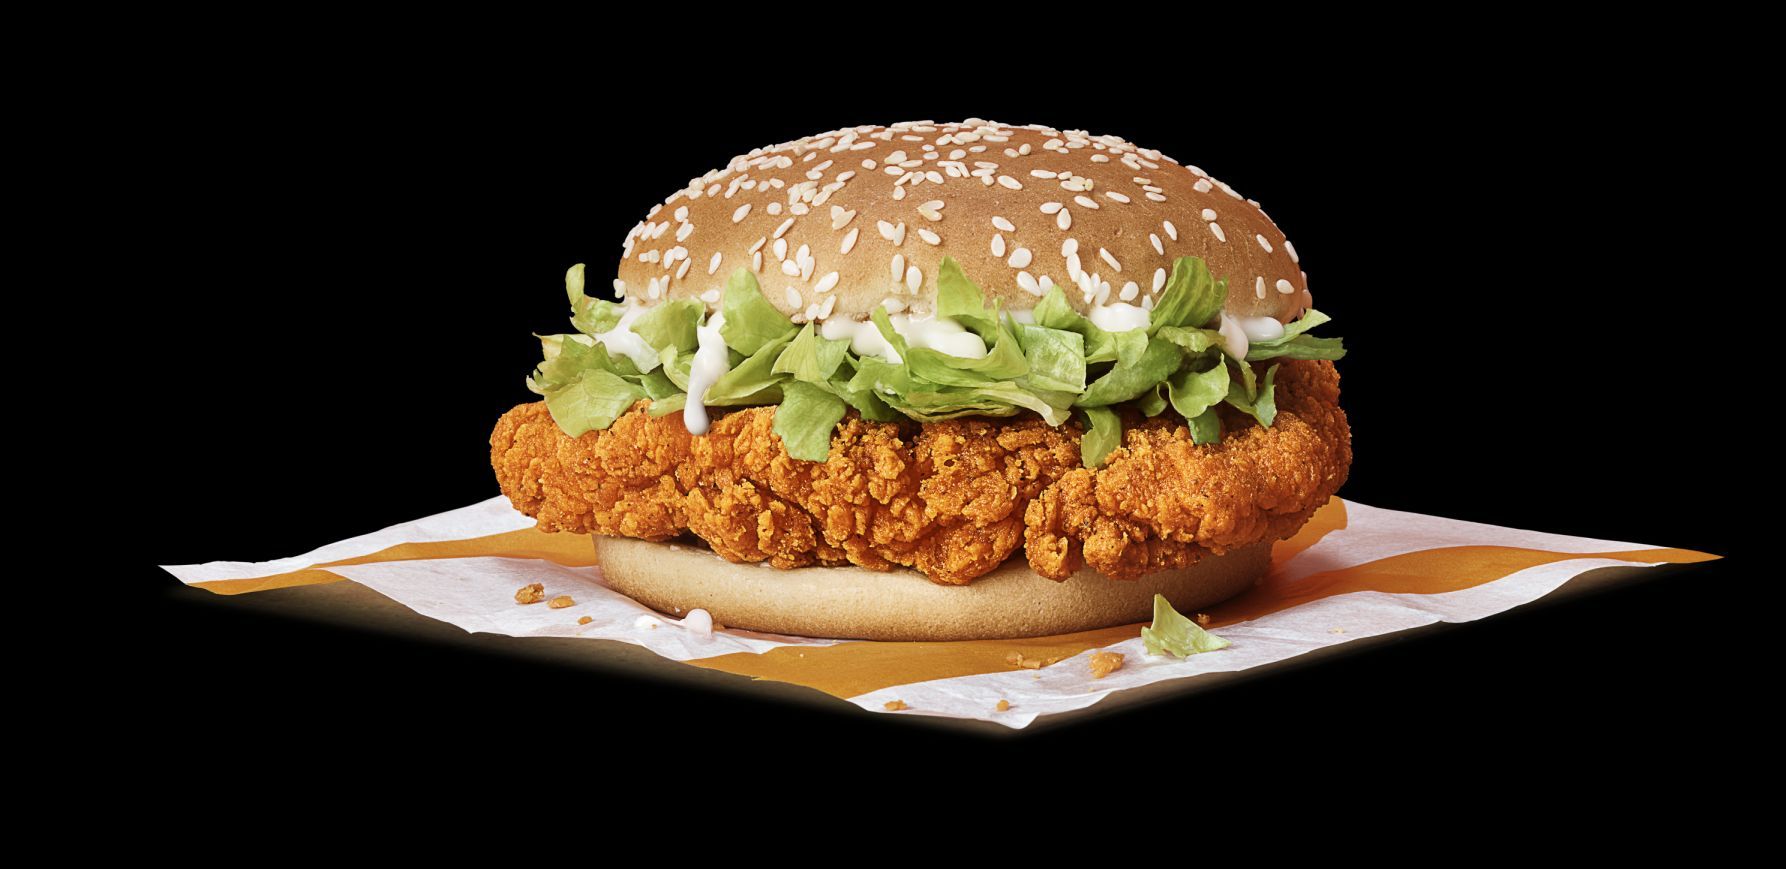 McDonald’s is adding its hottest ever burger, the McSpicy, to their menu